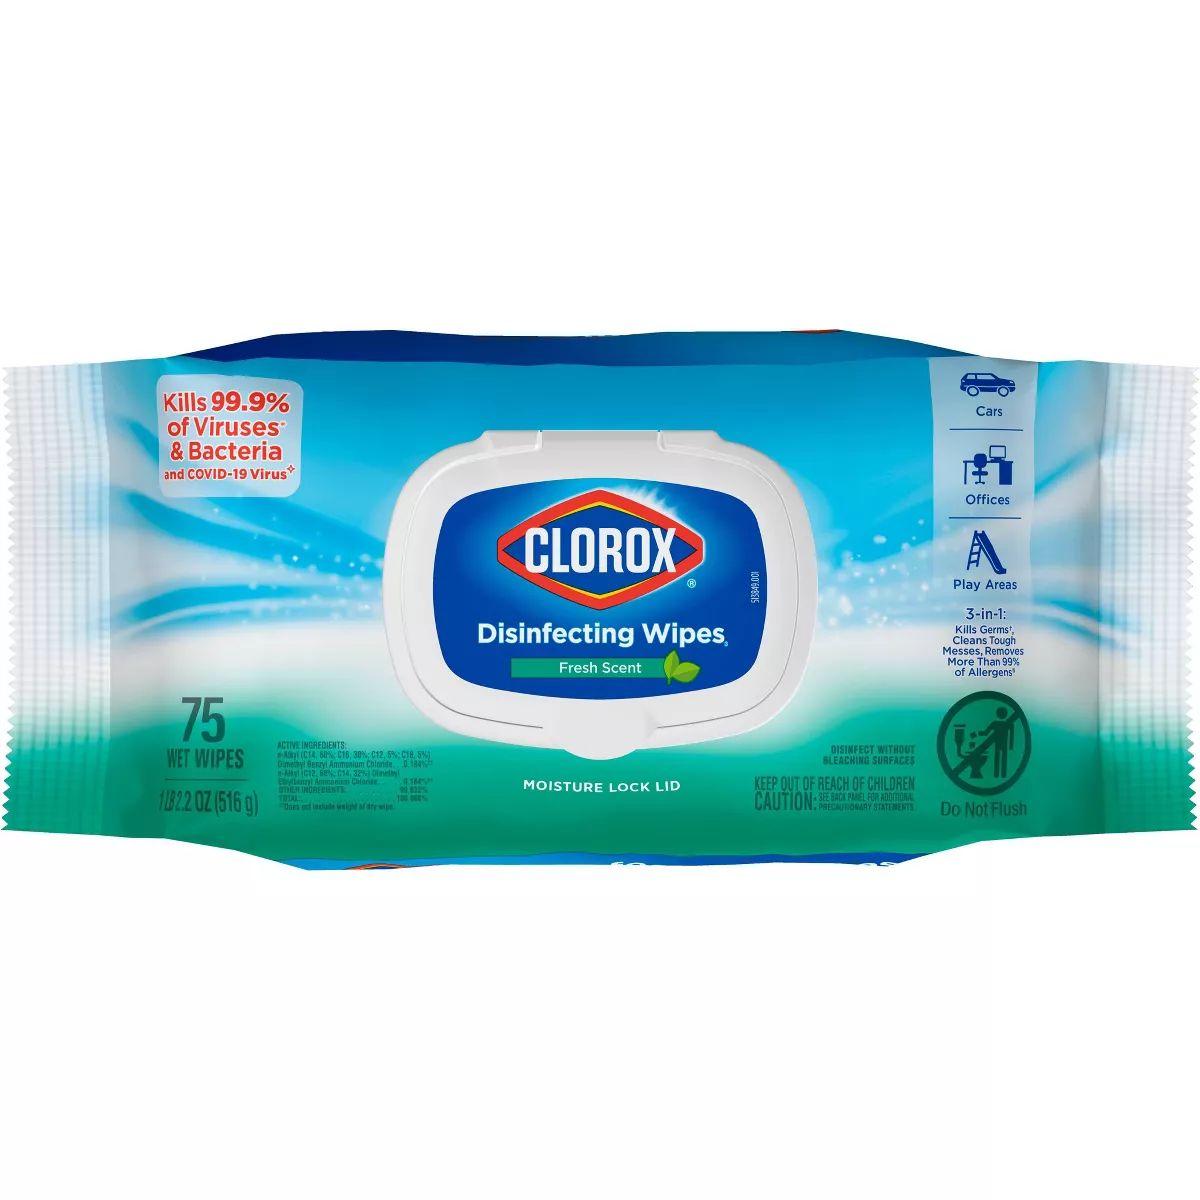 Clorox Fresh Scent Disinfecting Wipes - 75ct | Target